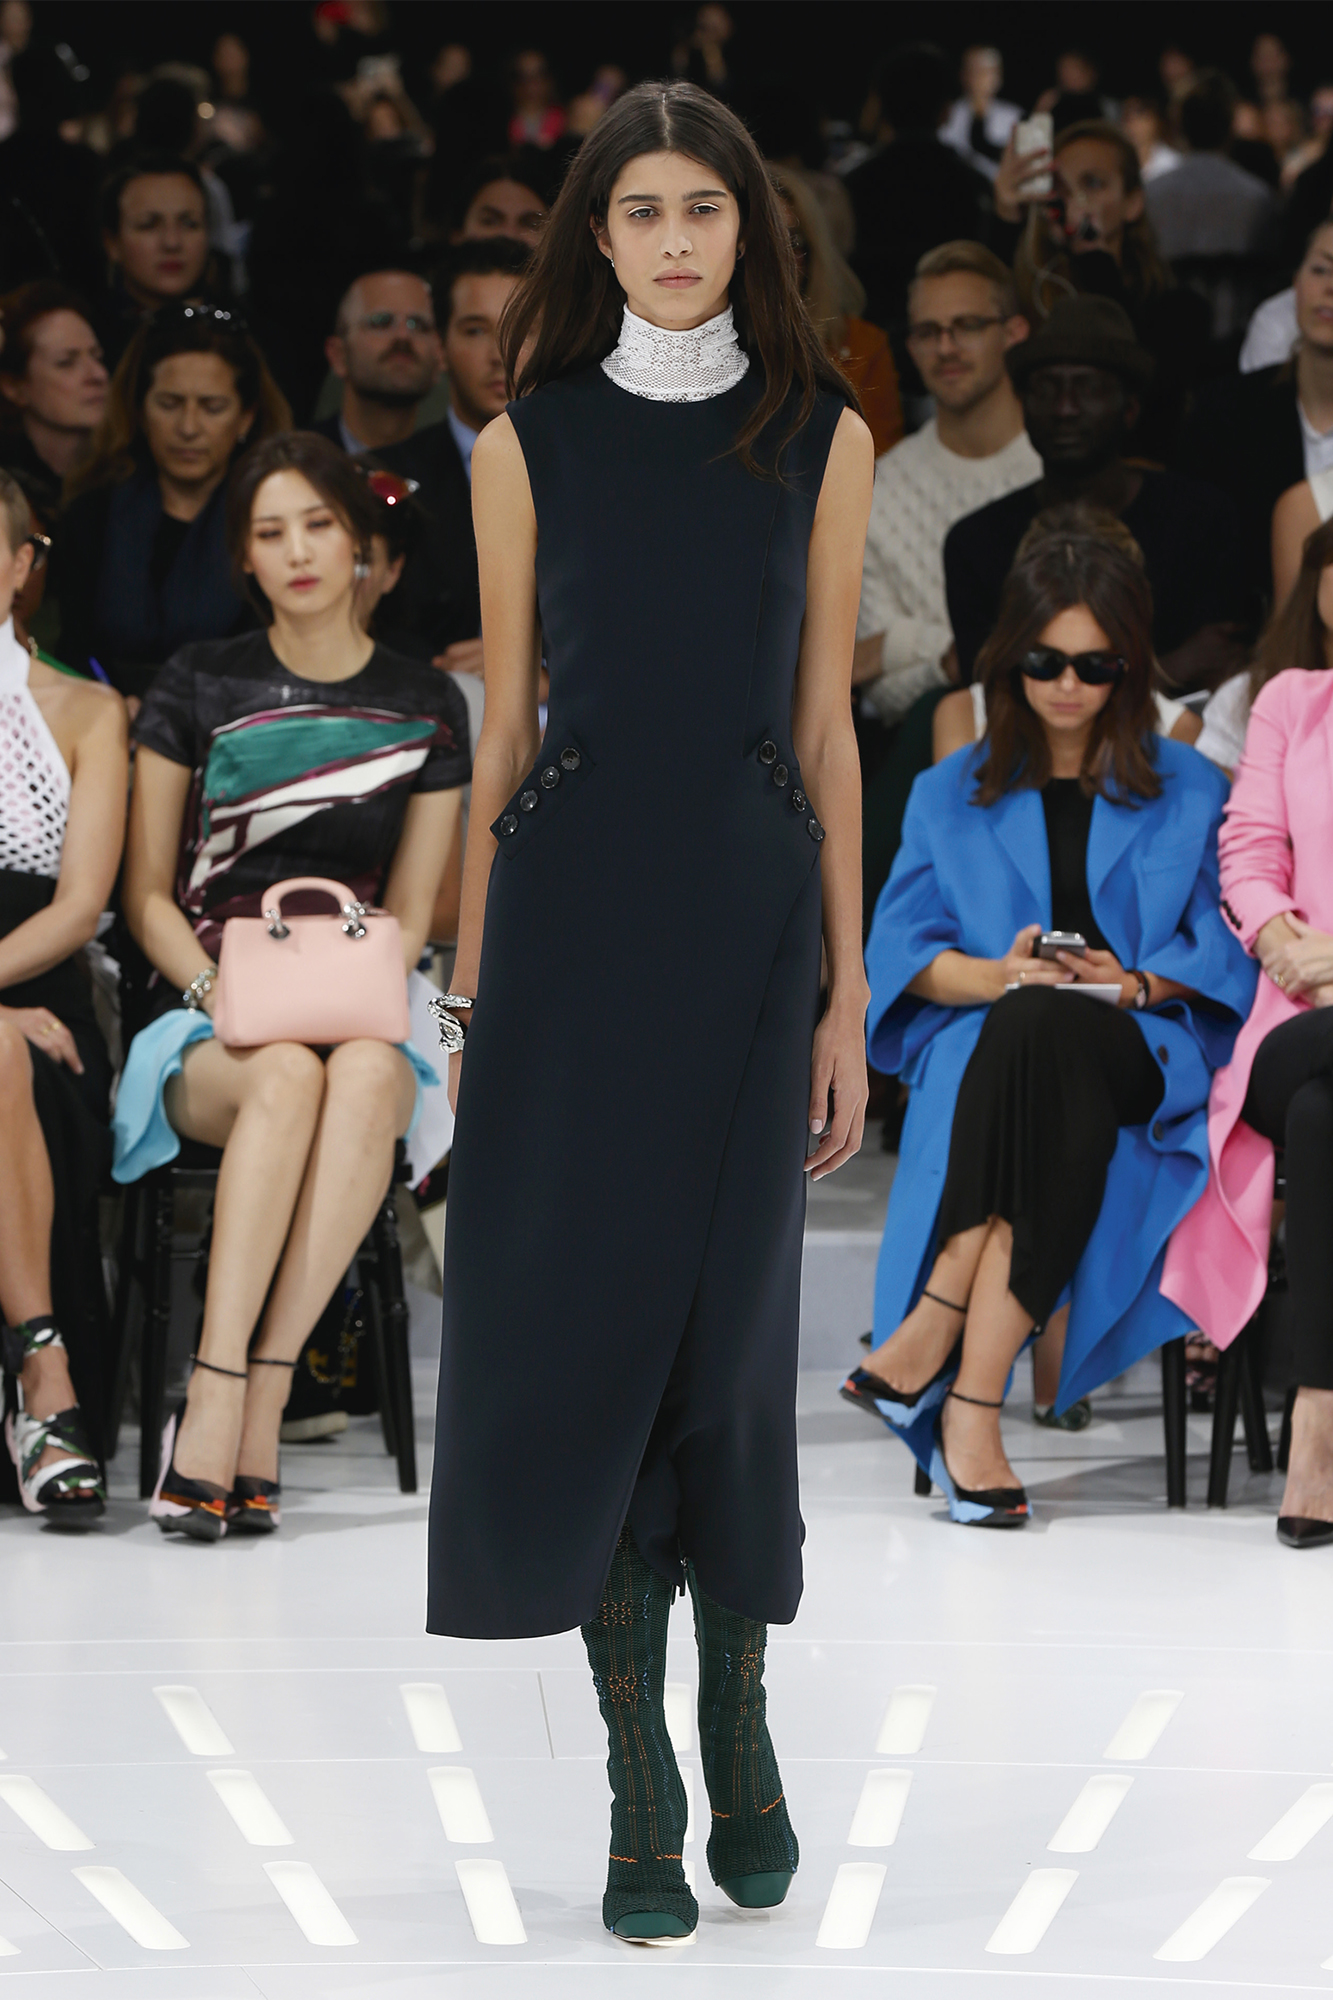 Christian Dior Haute Couture Spring-Summer Ready To Wear Dresses & Accessories Collection 2015-16 (30)